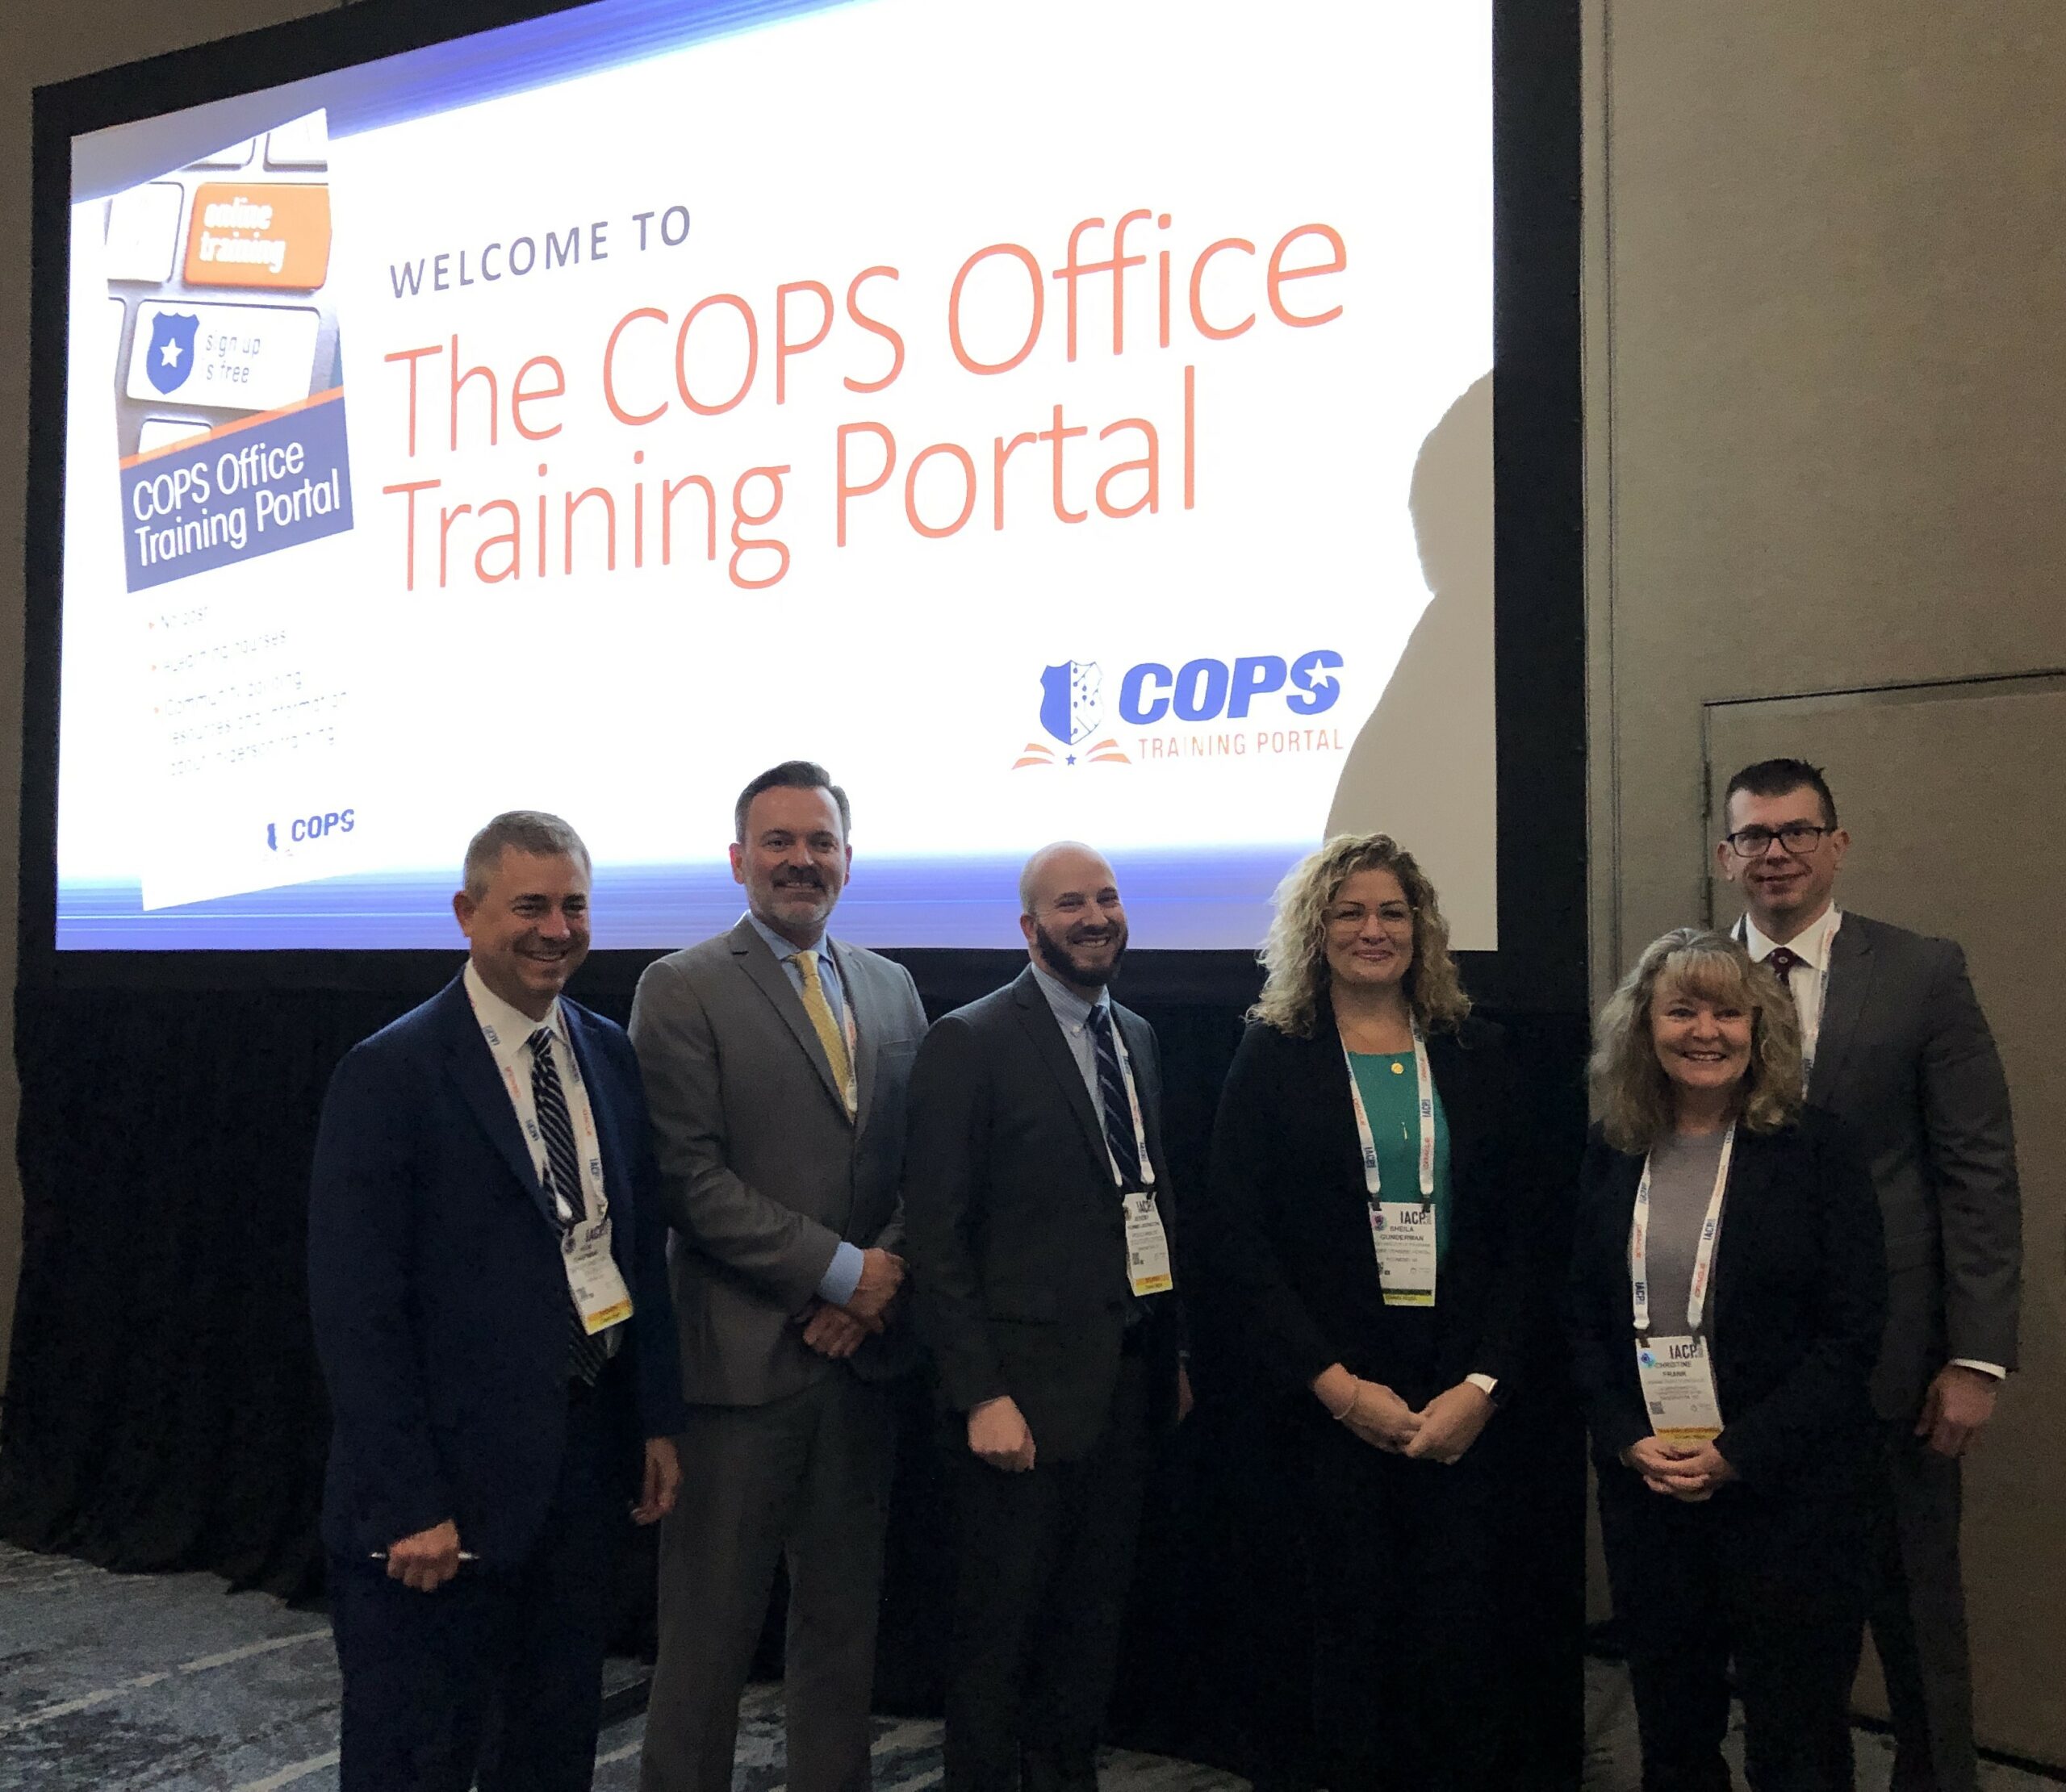 Five professionals posed in front of a screen prepared for a presentation on the COPS Training Portal.